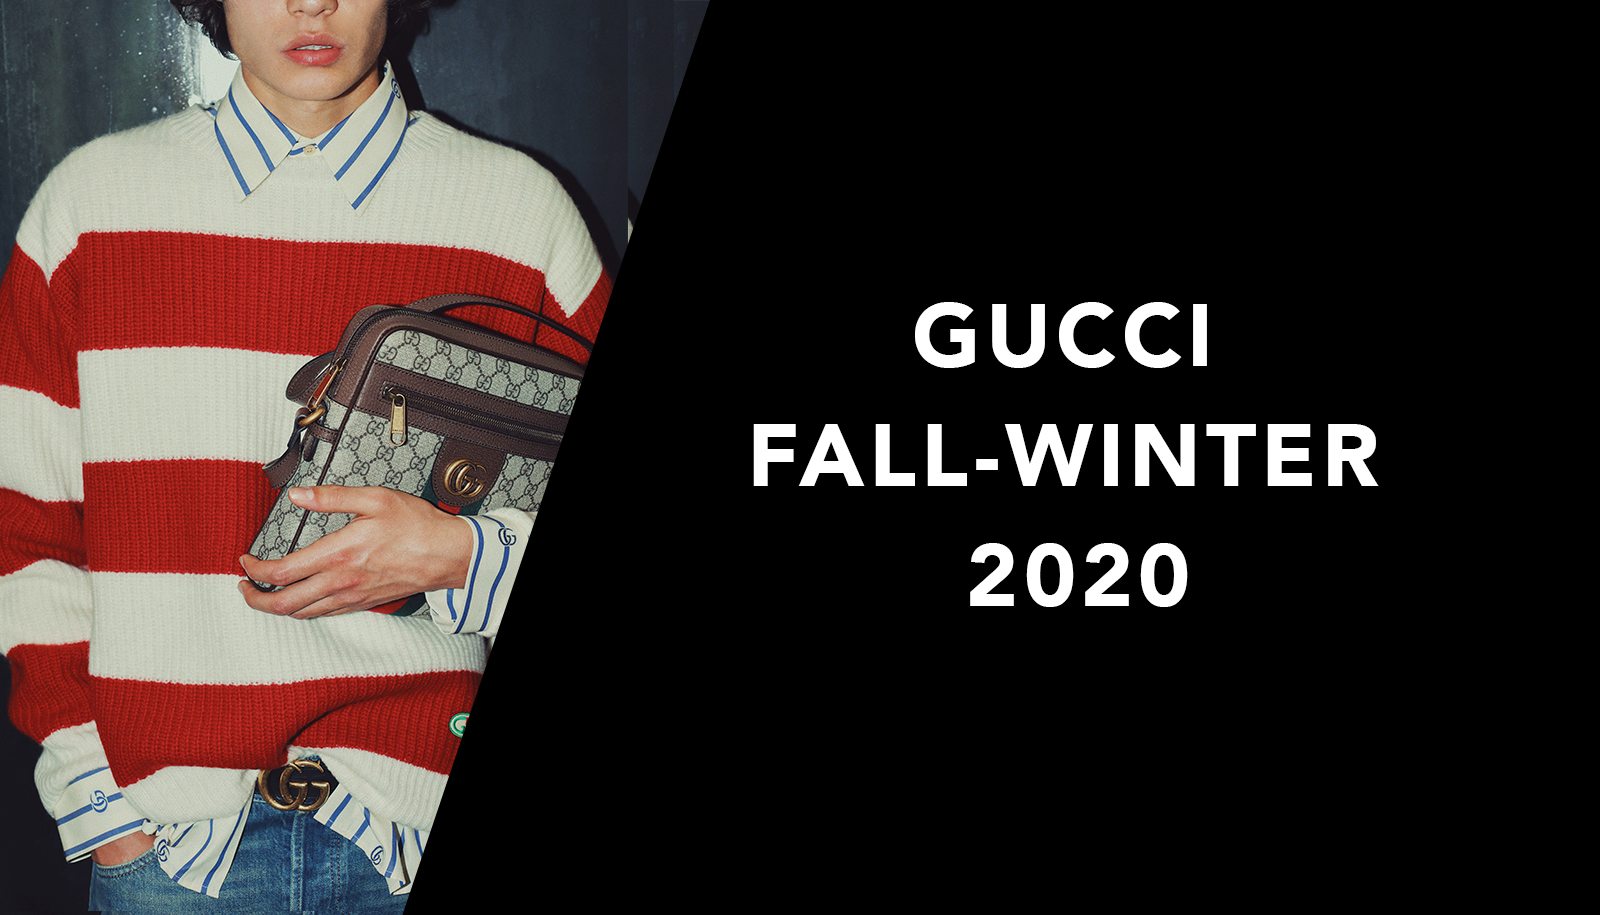 Gucci’s Fall-Winter 2020 Collections are Essential